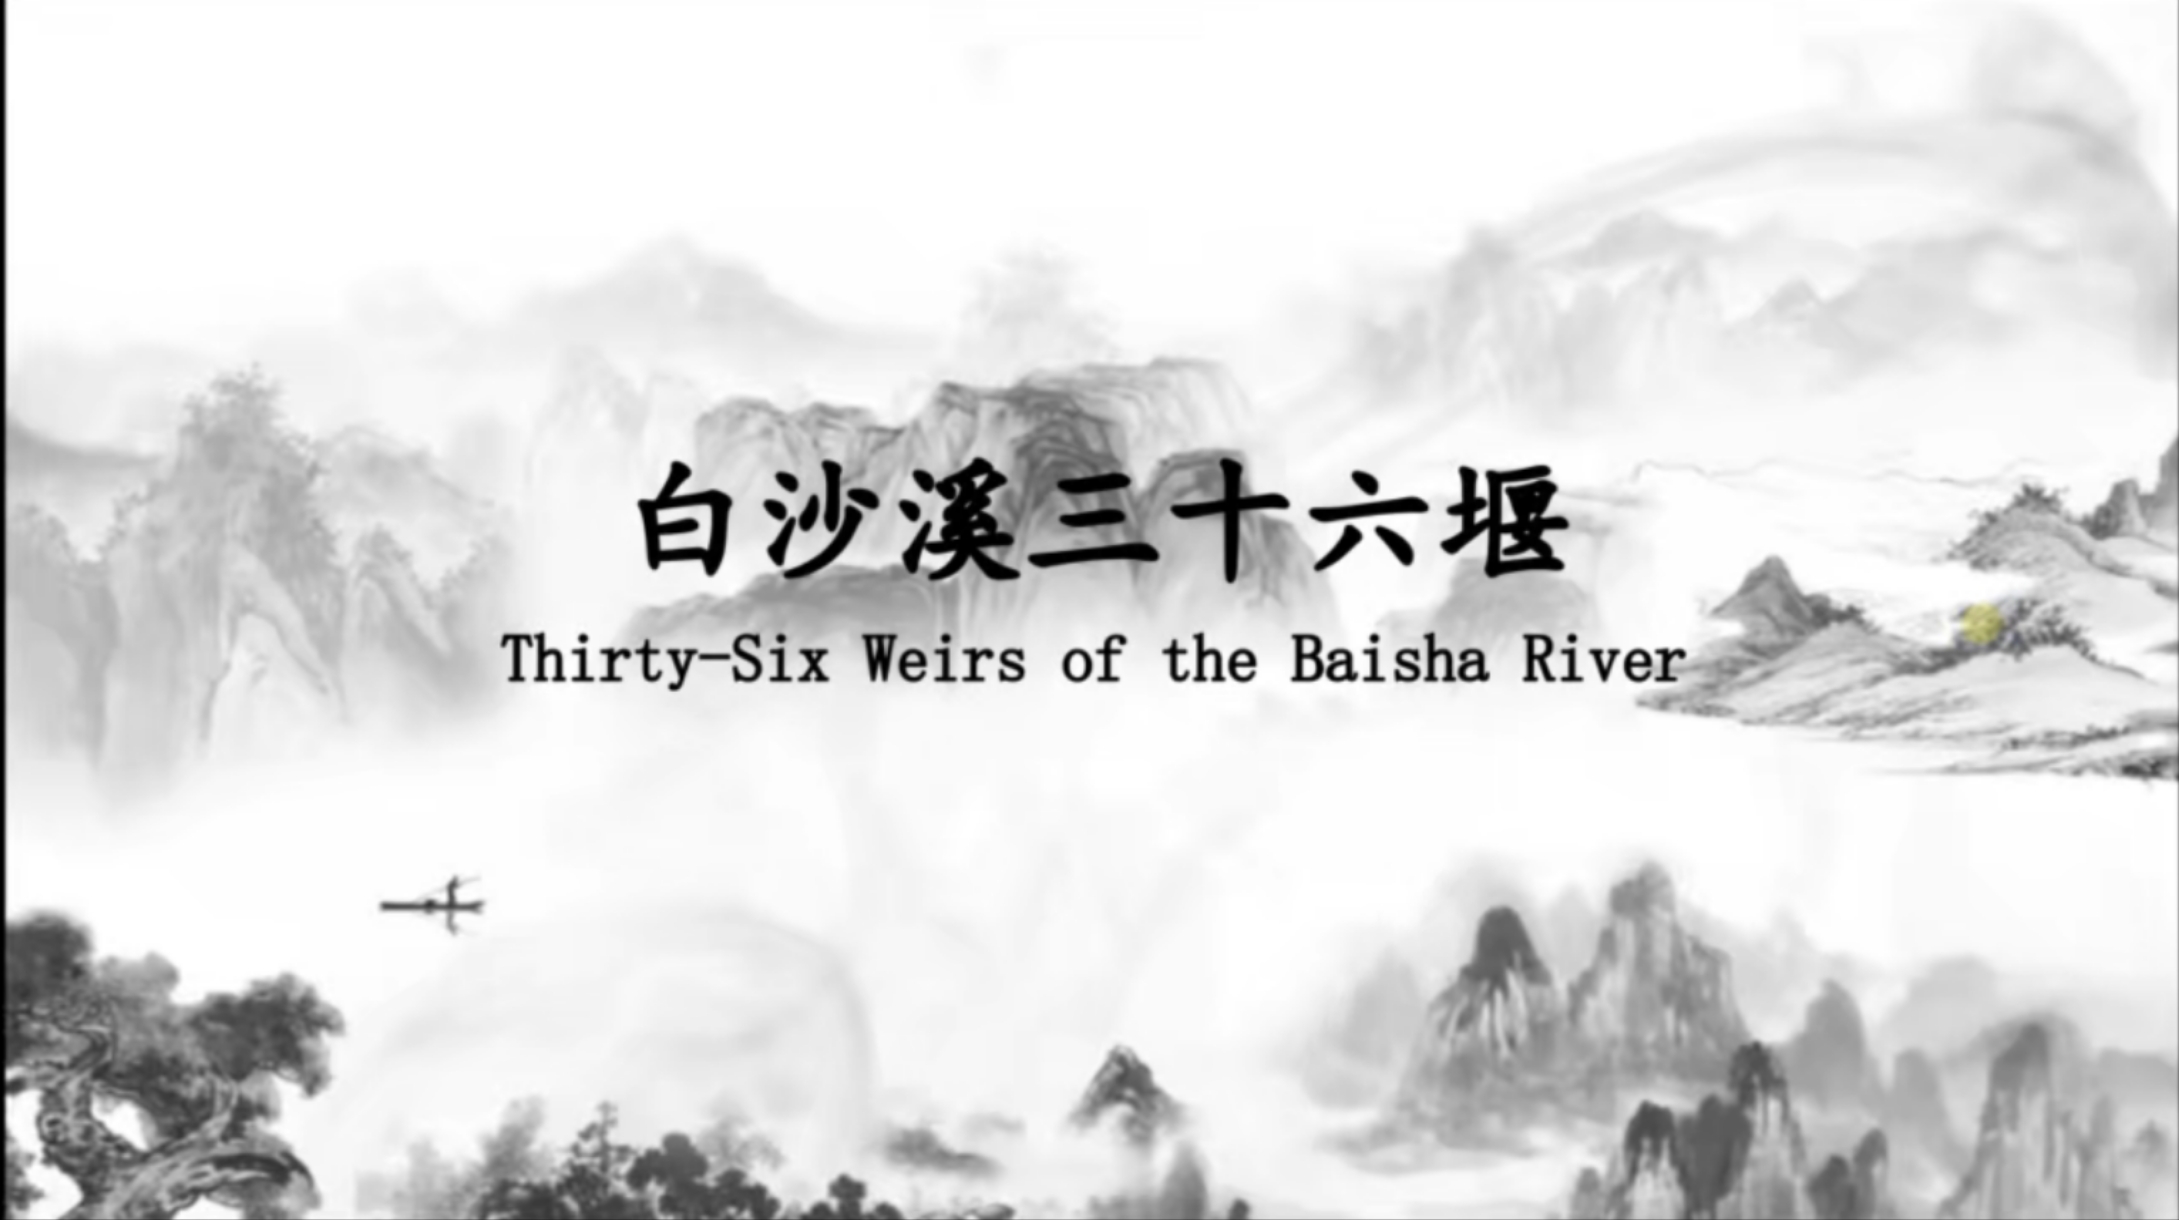 Lesson 5: World Irrigation Heritage：Thirty-Six Weirs of the Baisha River